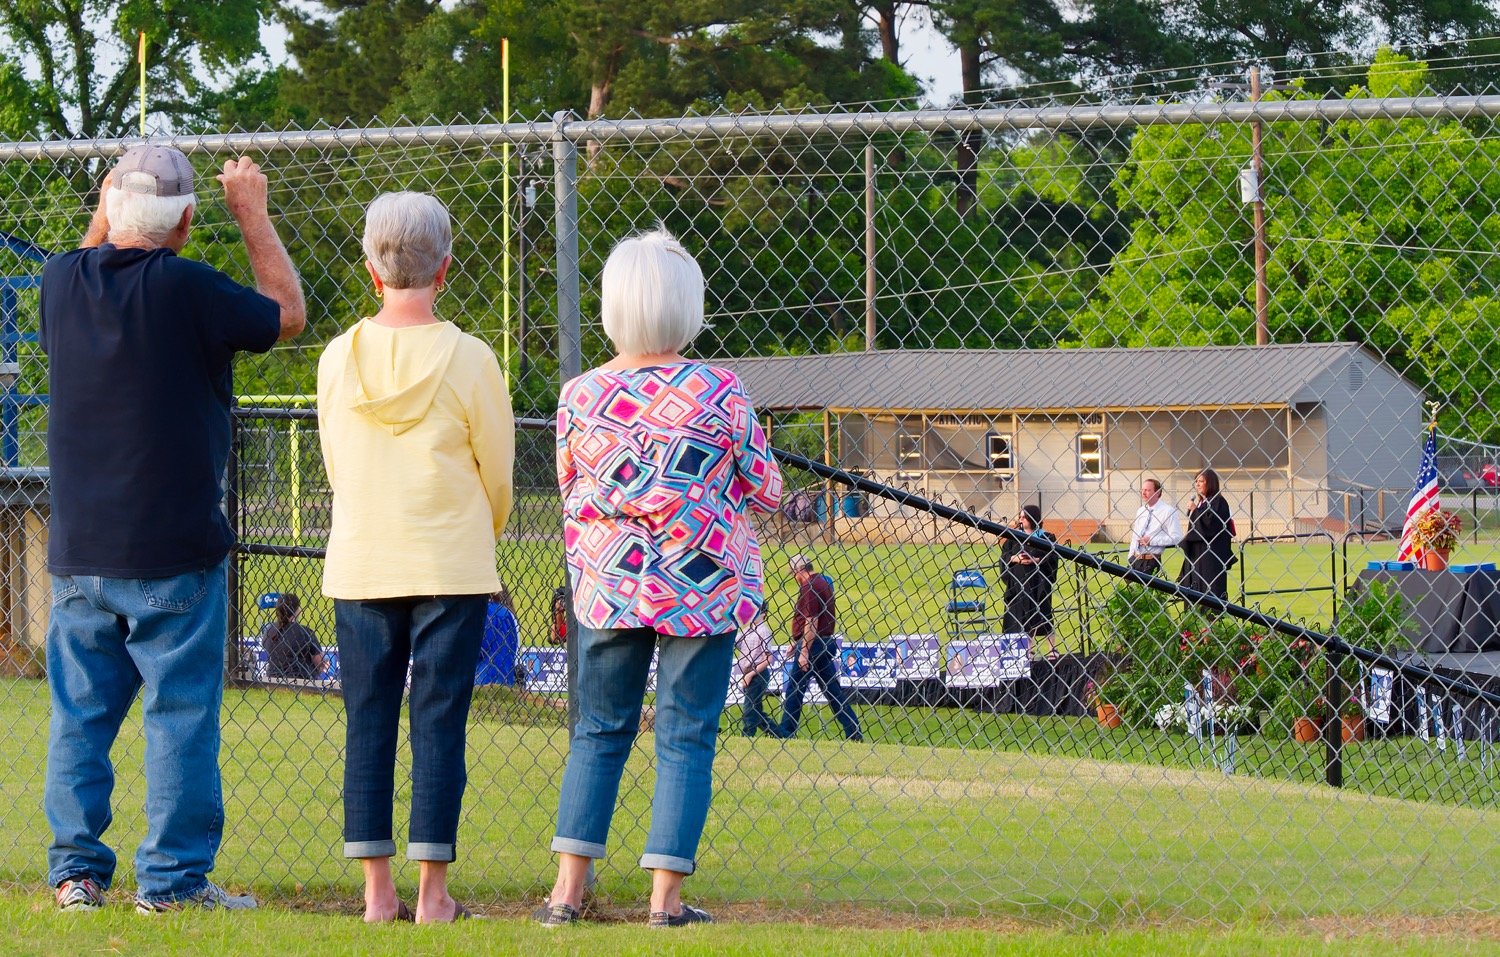 Graduates could have four family members accompany them onto the field for a group photo and get a front row seat to their walk across the stage, but that didn't keep some friends and extended family members from witnessing the Quitman graduates walk from outside the stadium.